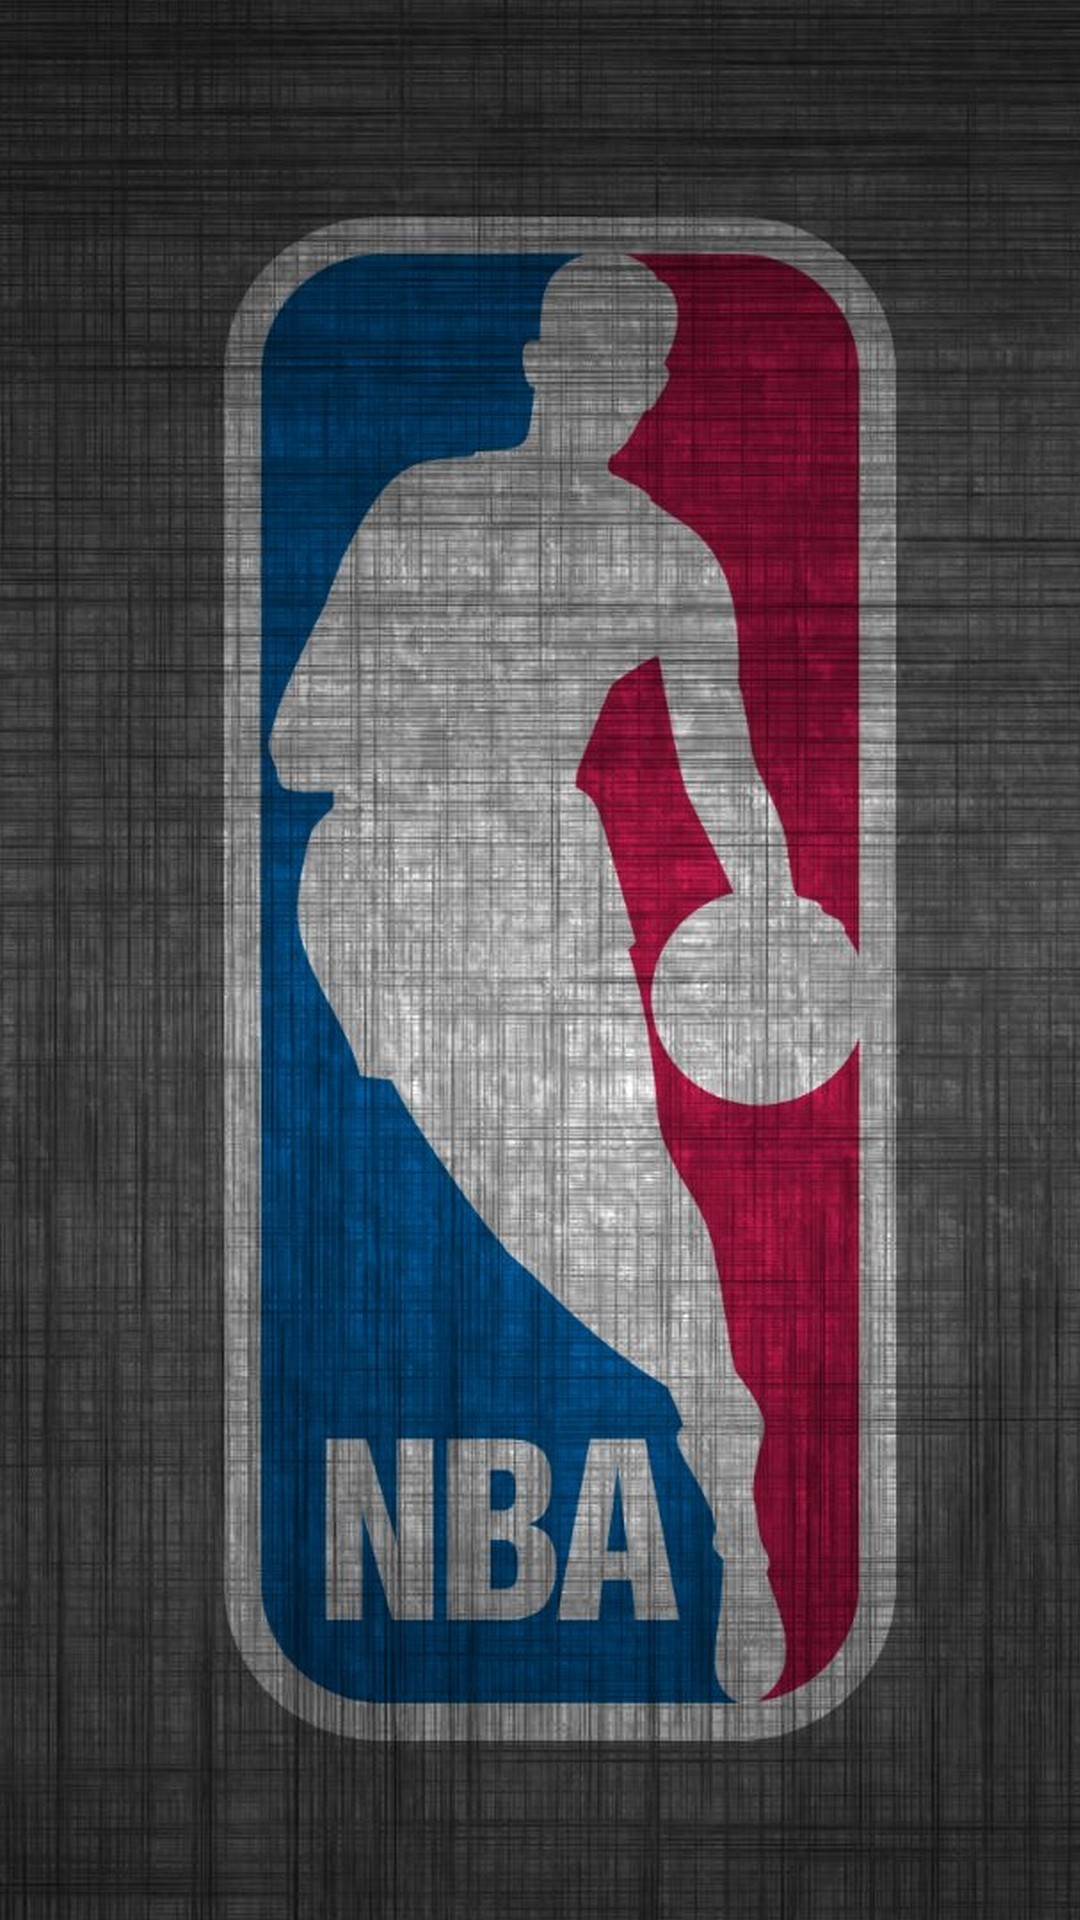 NBA Wallpaper Mobile with image dimensions 1080x1920 pixel. You can make this wallpaper for your Desktop Computer Backgrounds, Windows or Mac Screensavers, iPhone Lock screen, Tablet or Android and another Mobile Phone device